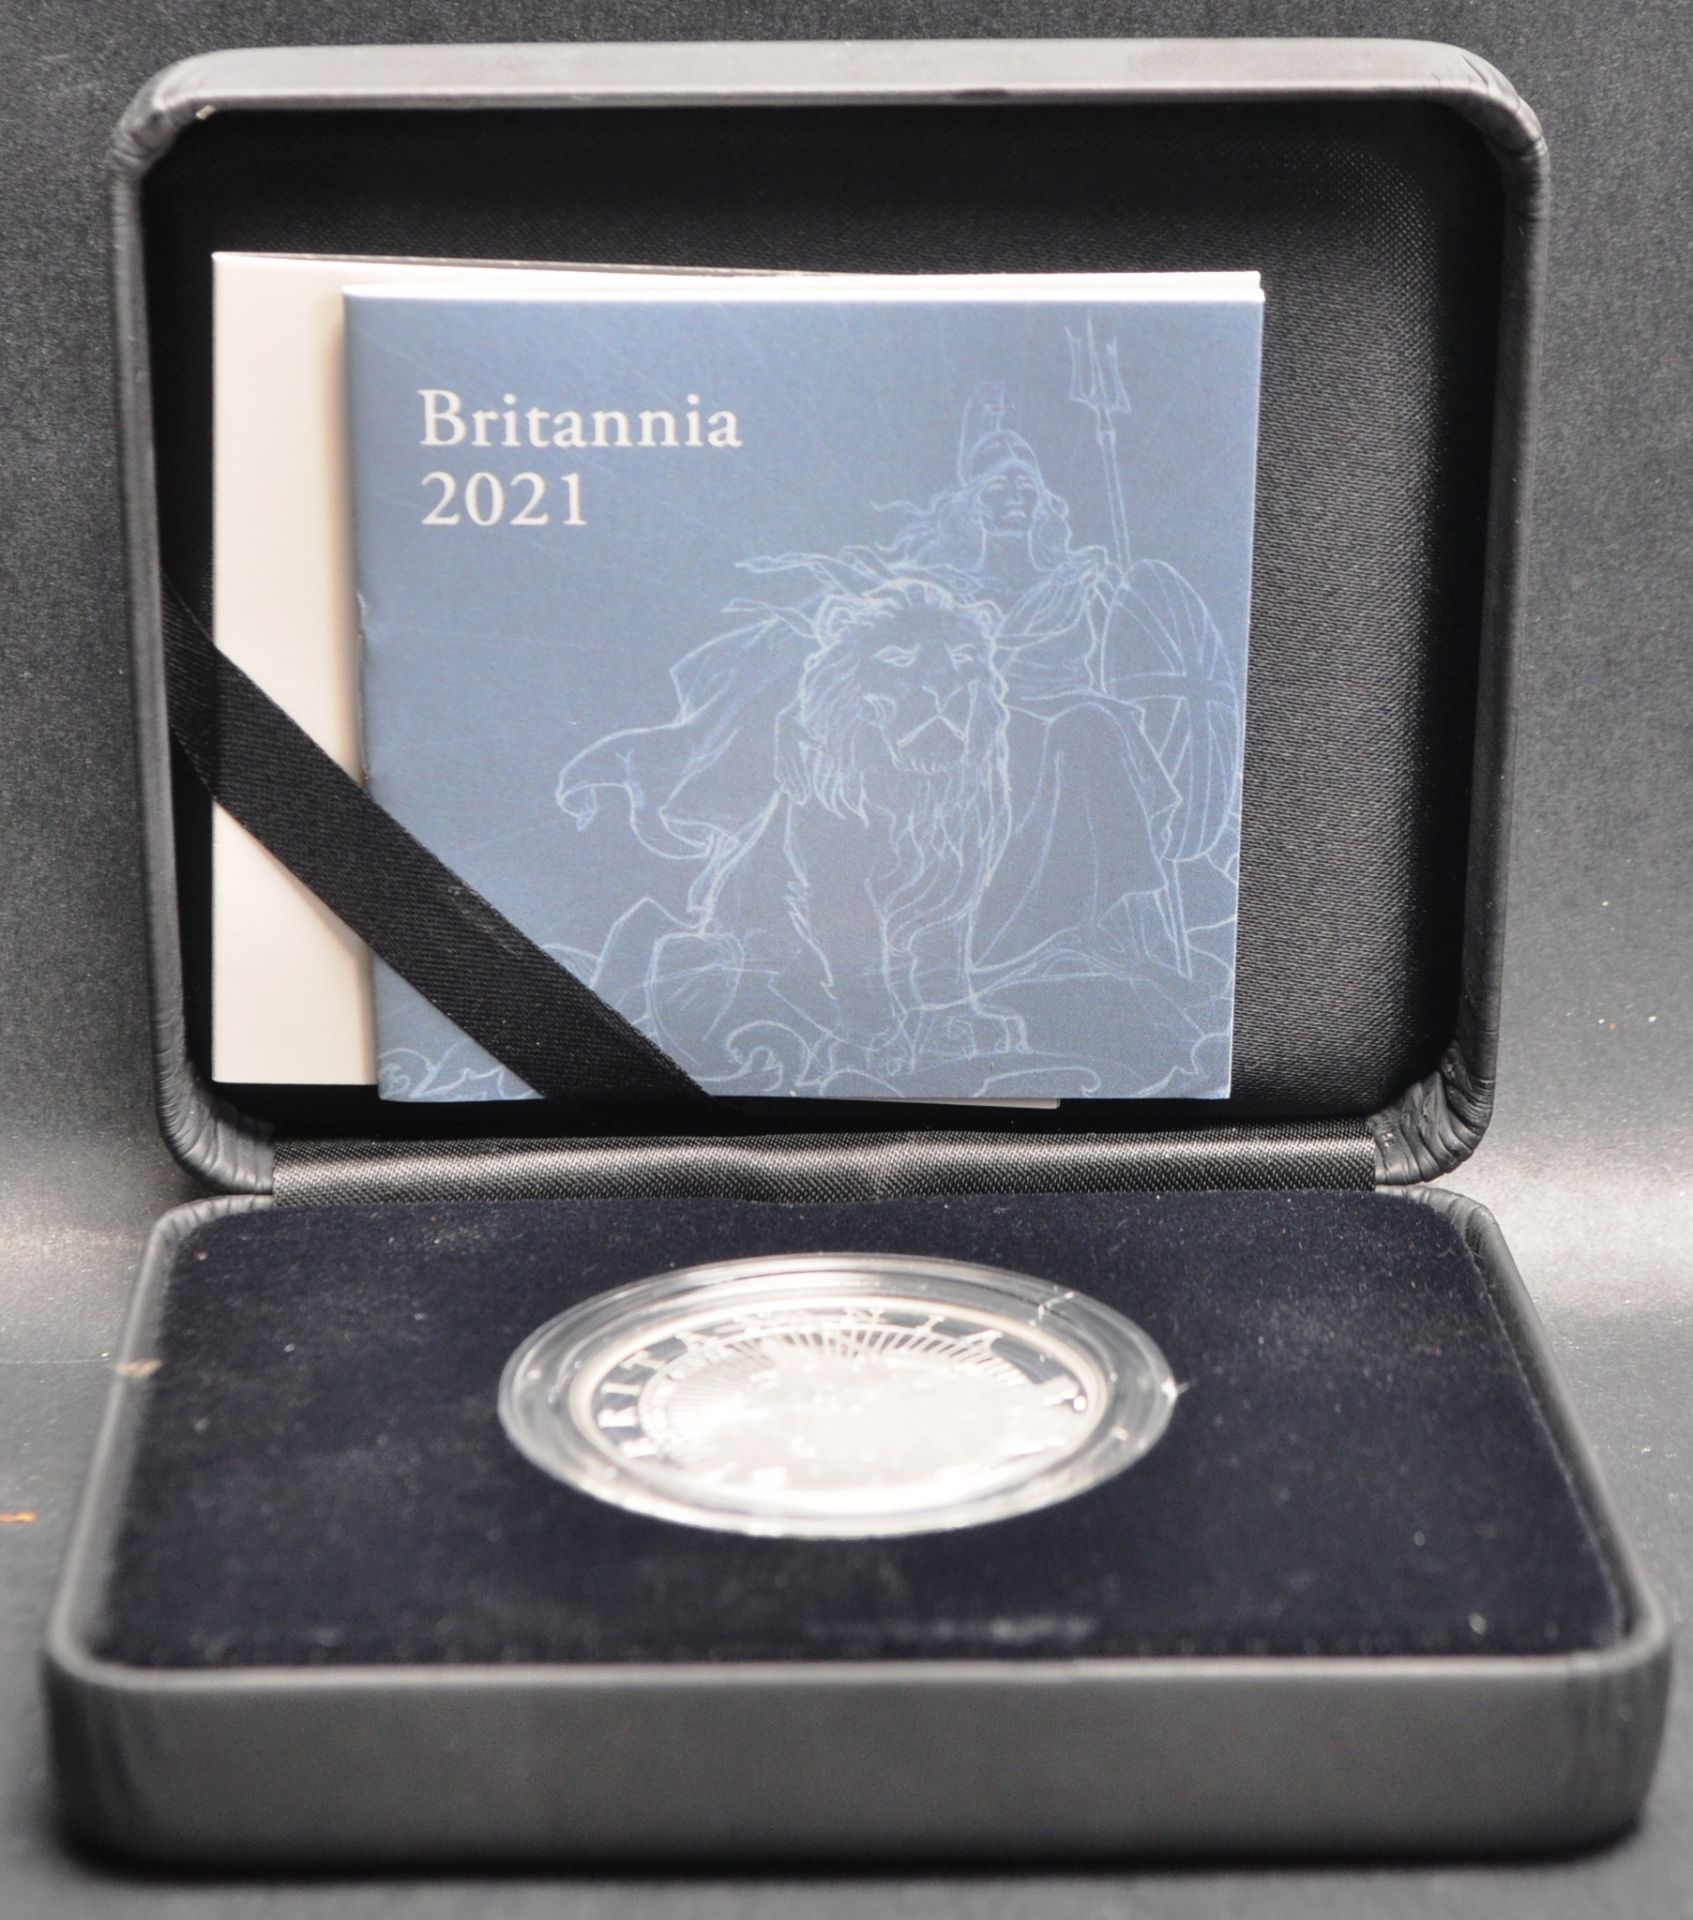 THE ROYAL MINT - BRITANNIA 2021 ONE OUNCE SILVER PROOF COIN